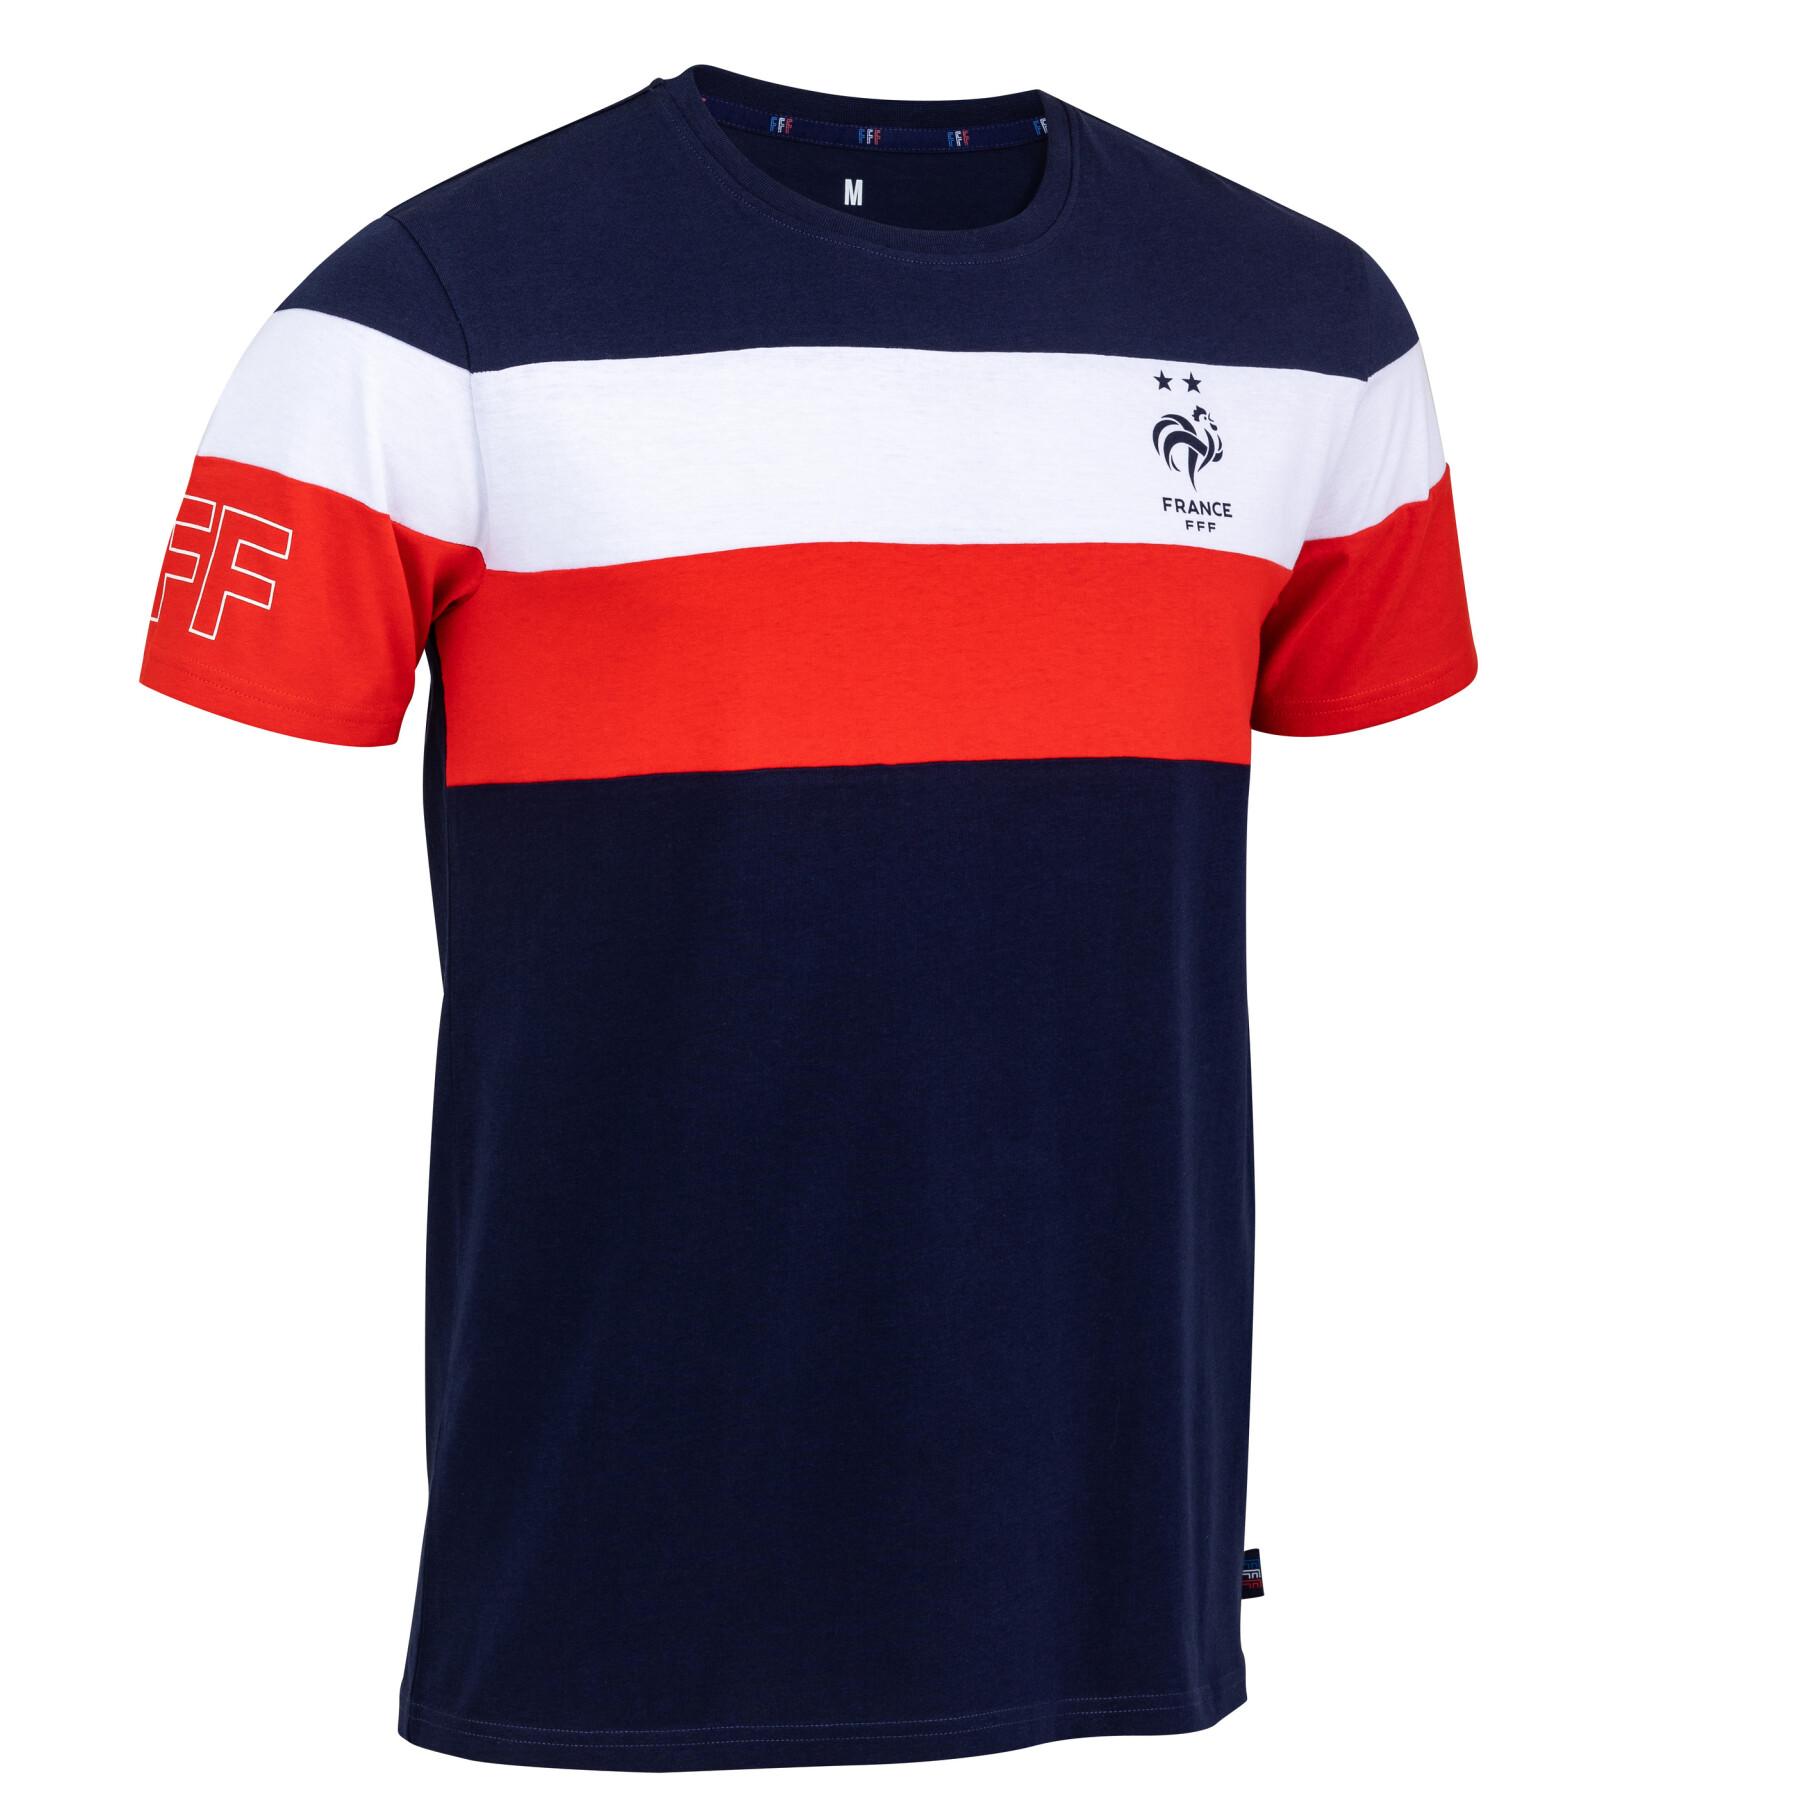 Team T-shirt from France 2022/23 Block